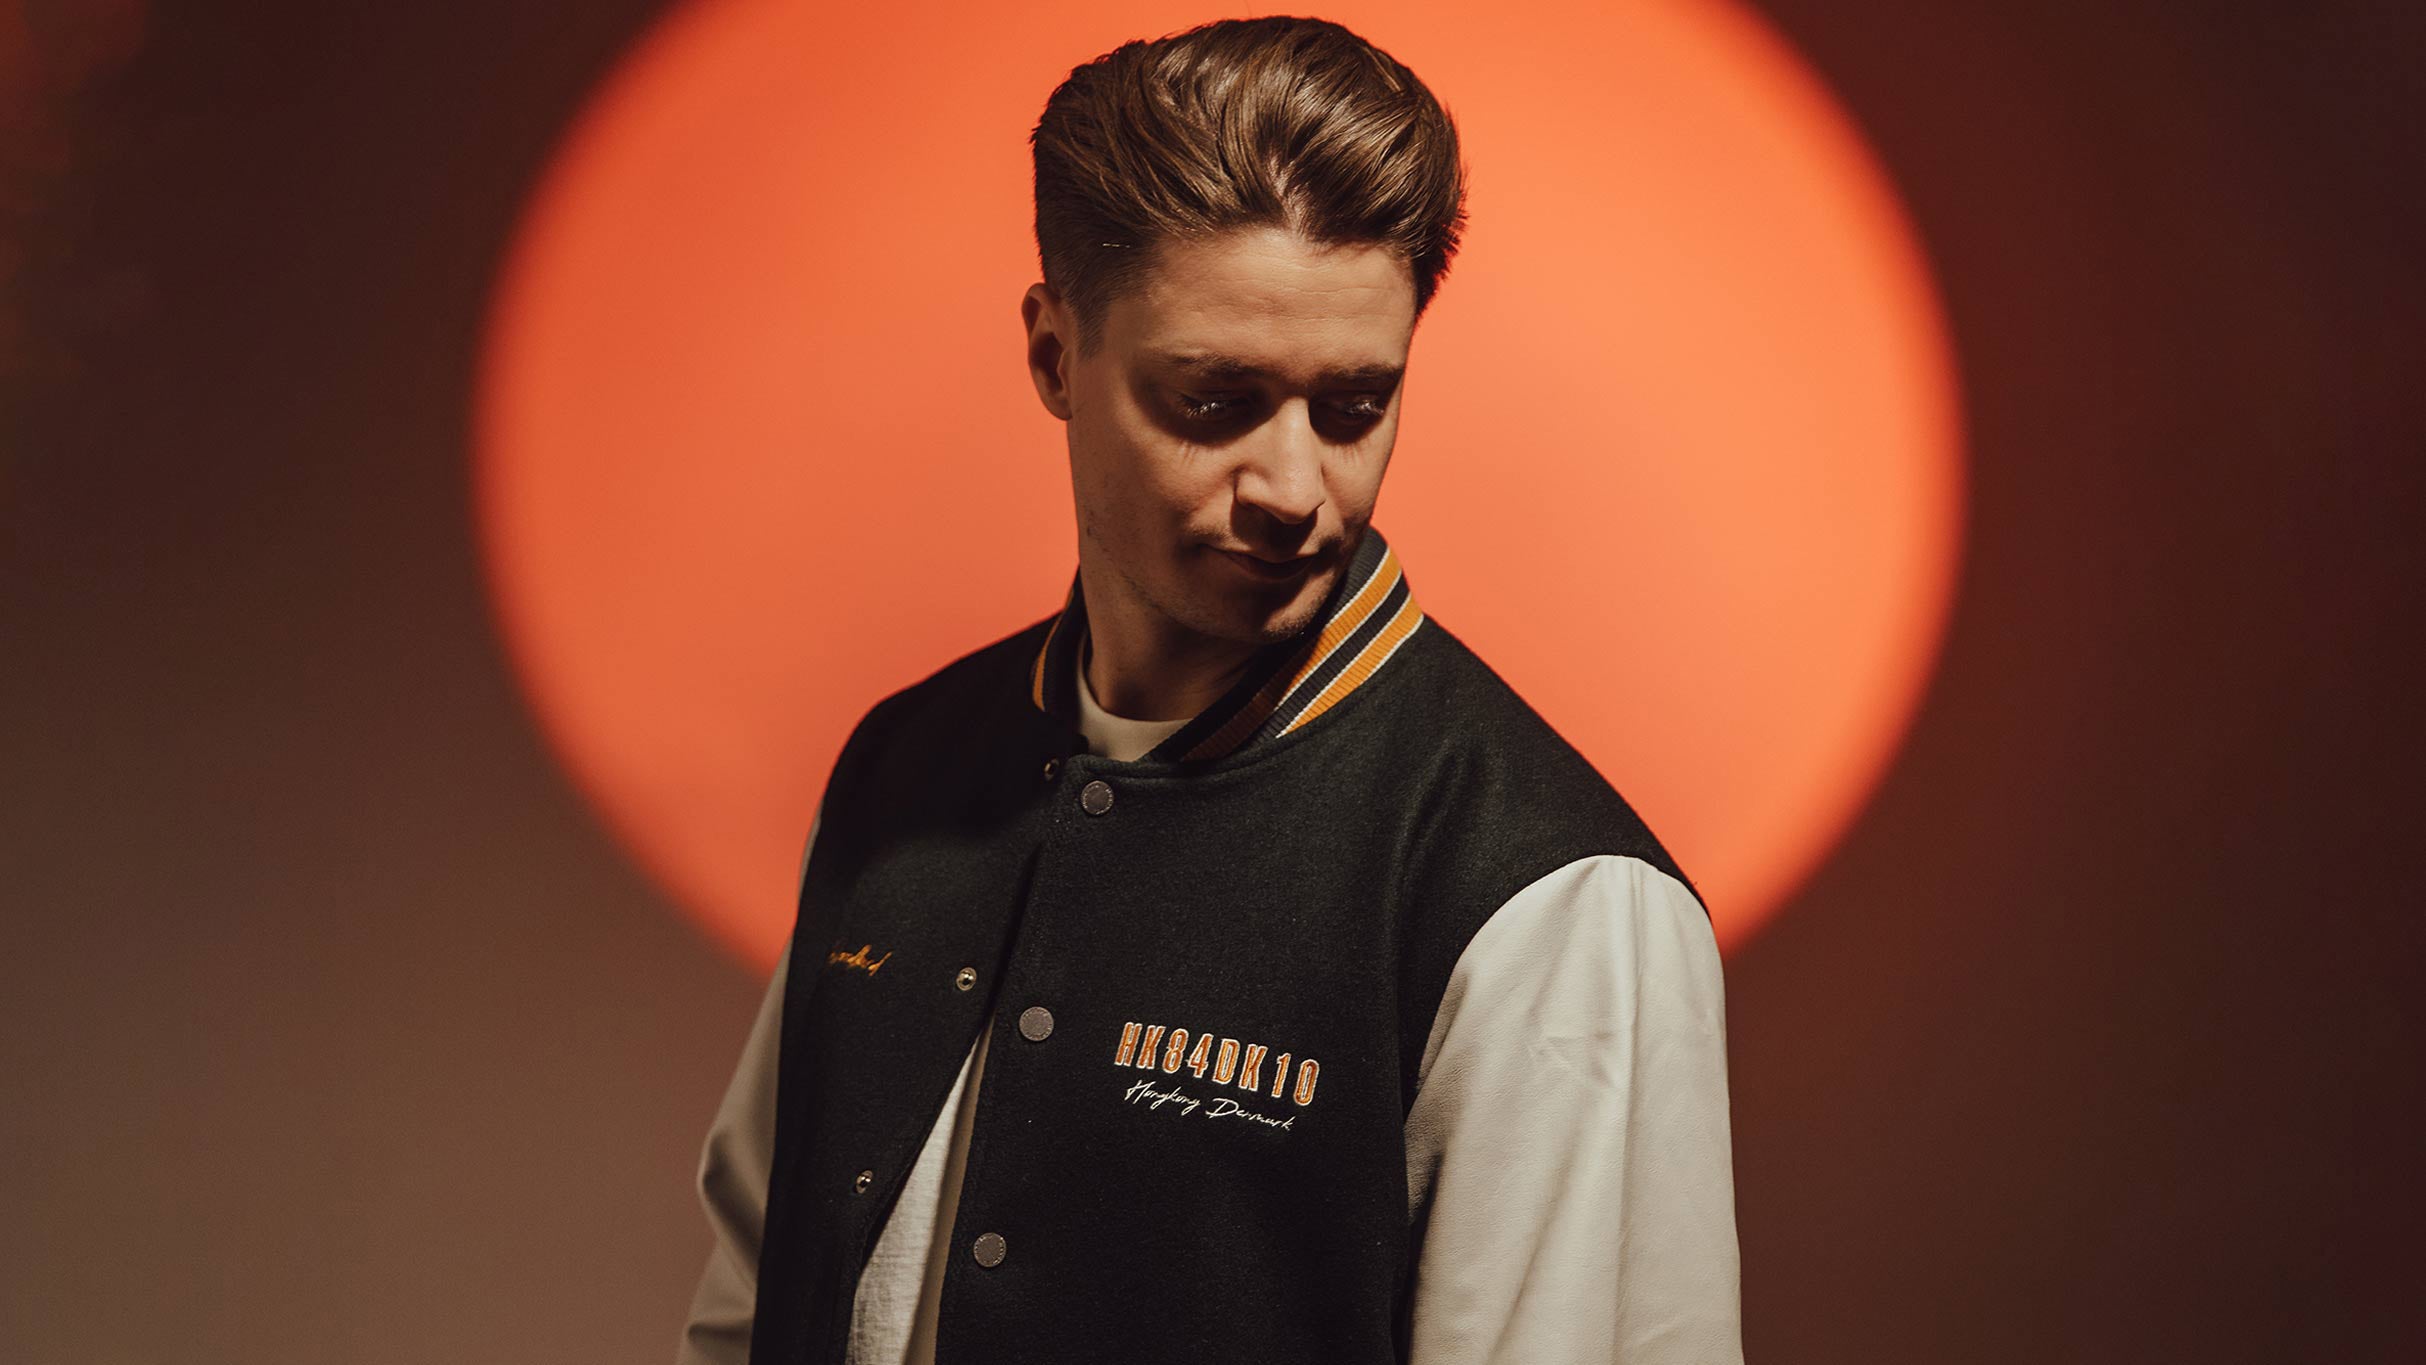 KYGO WORLD TOUR presale code for concert tickets in Vancouver, BC (Rogers Arena)